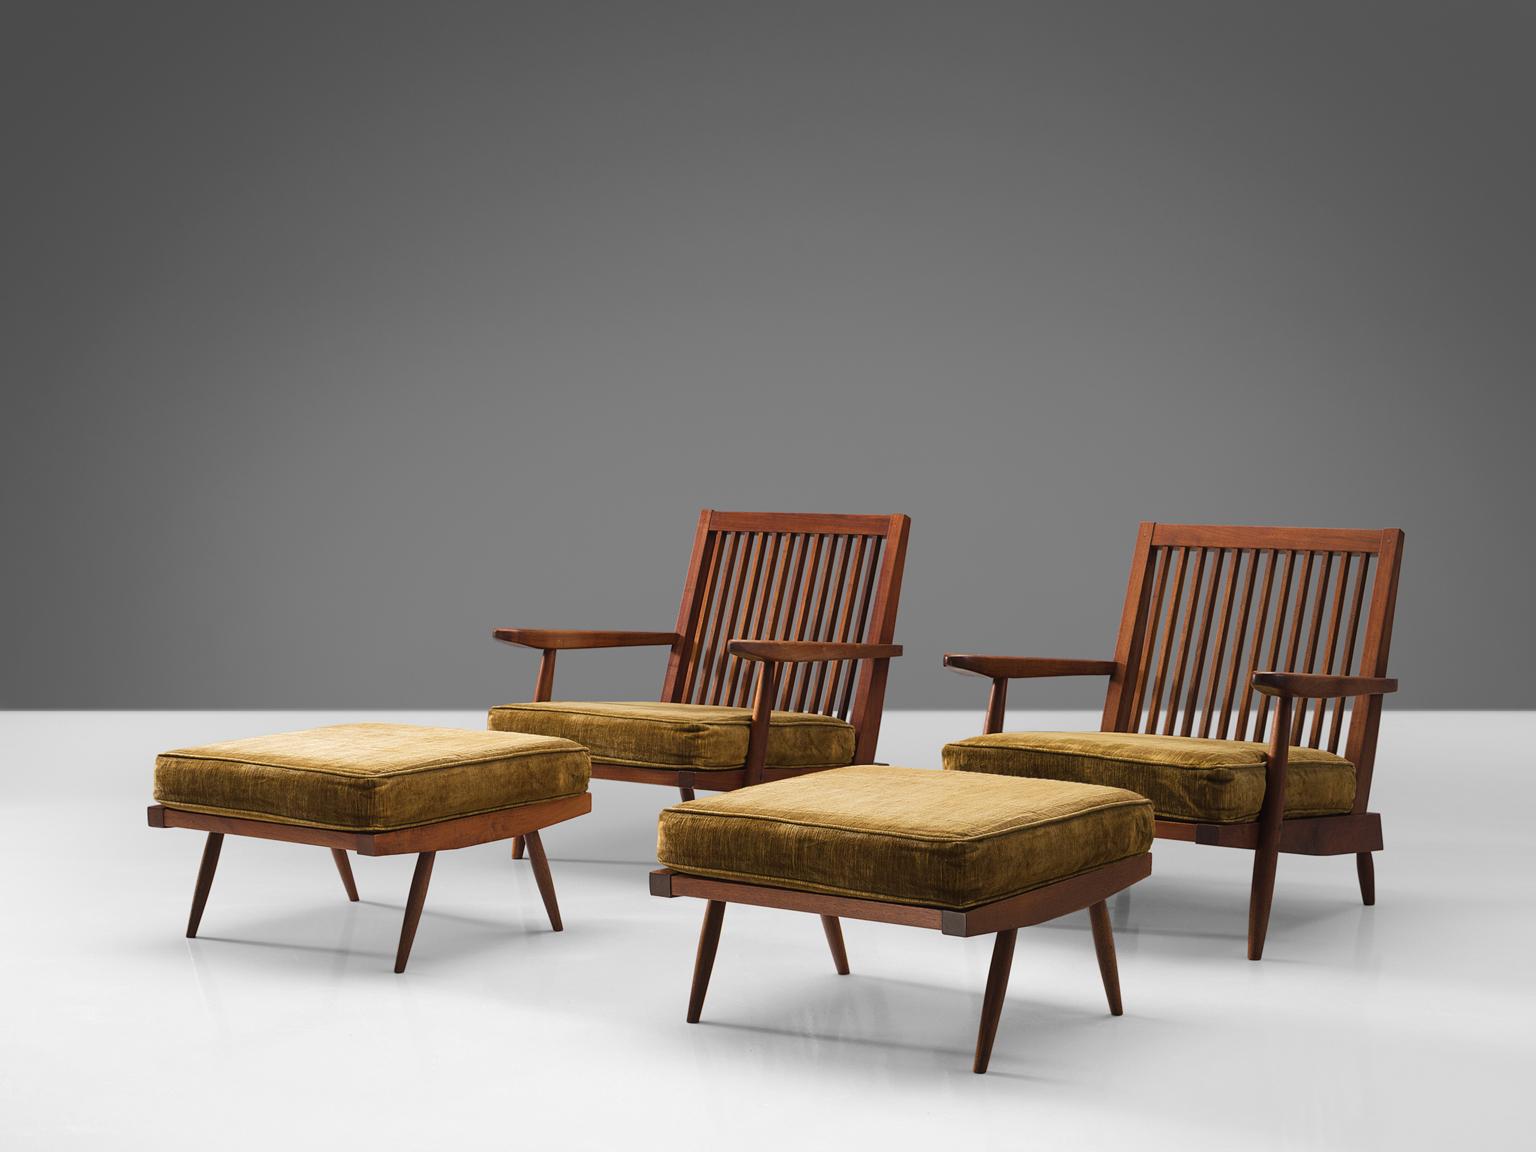 George Nakashima, armchairs, walnut, green to ocre fabric, United States, design, circa 1950.

These quintessential spindleback armchairs and ottomans are designed by Nakashima. The chairs feature spindles at the back, referring with this detail